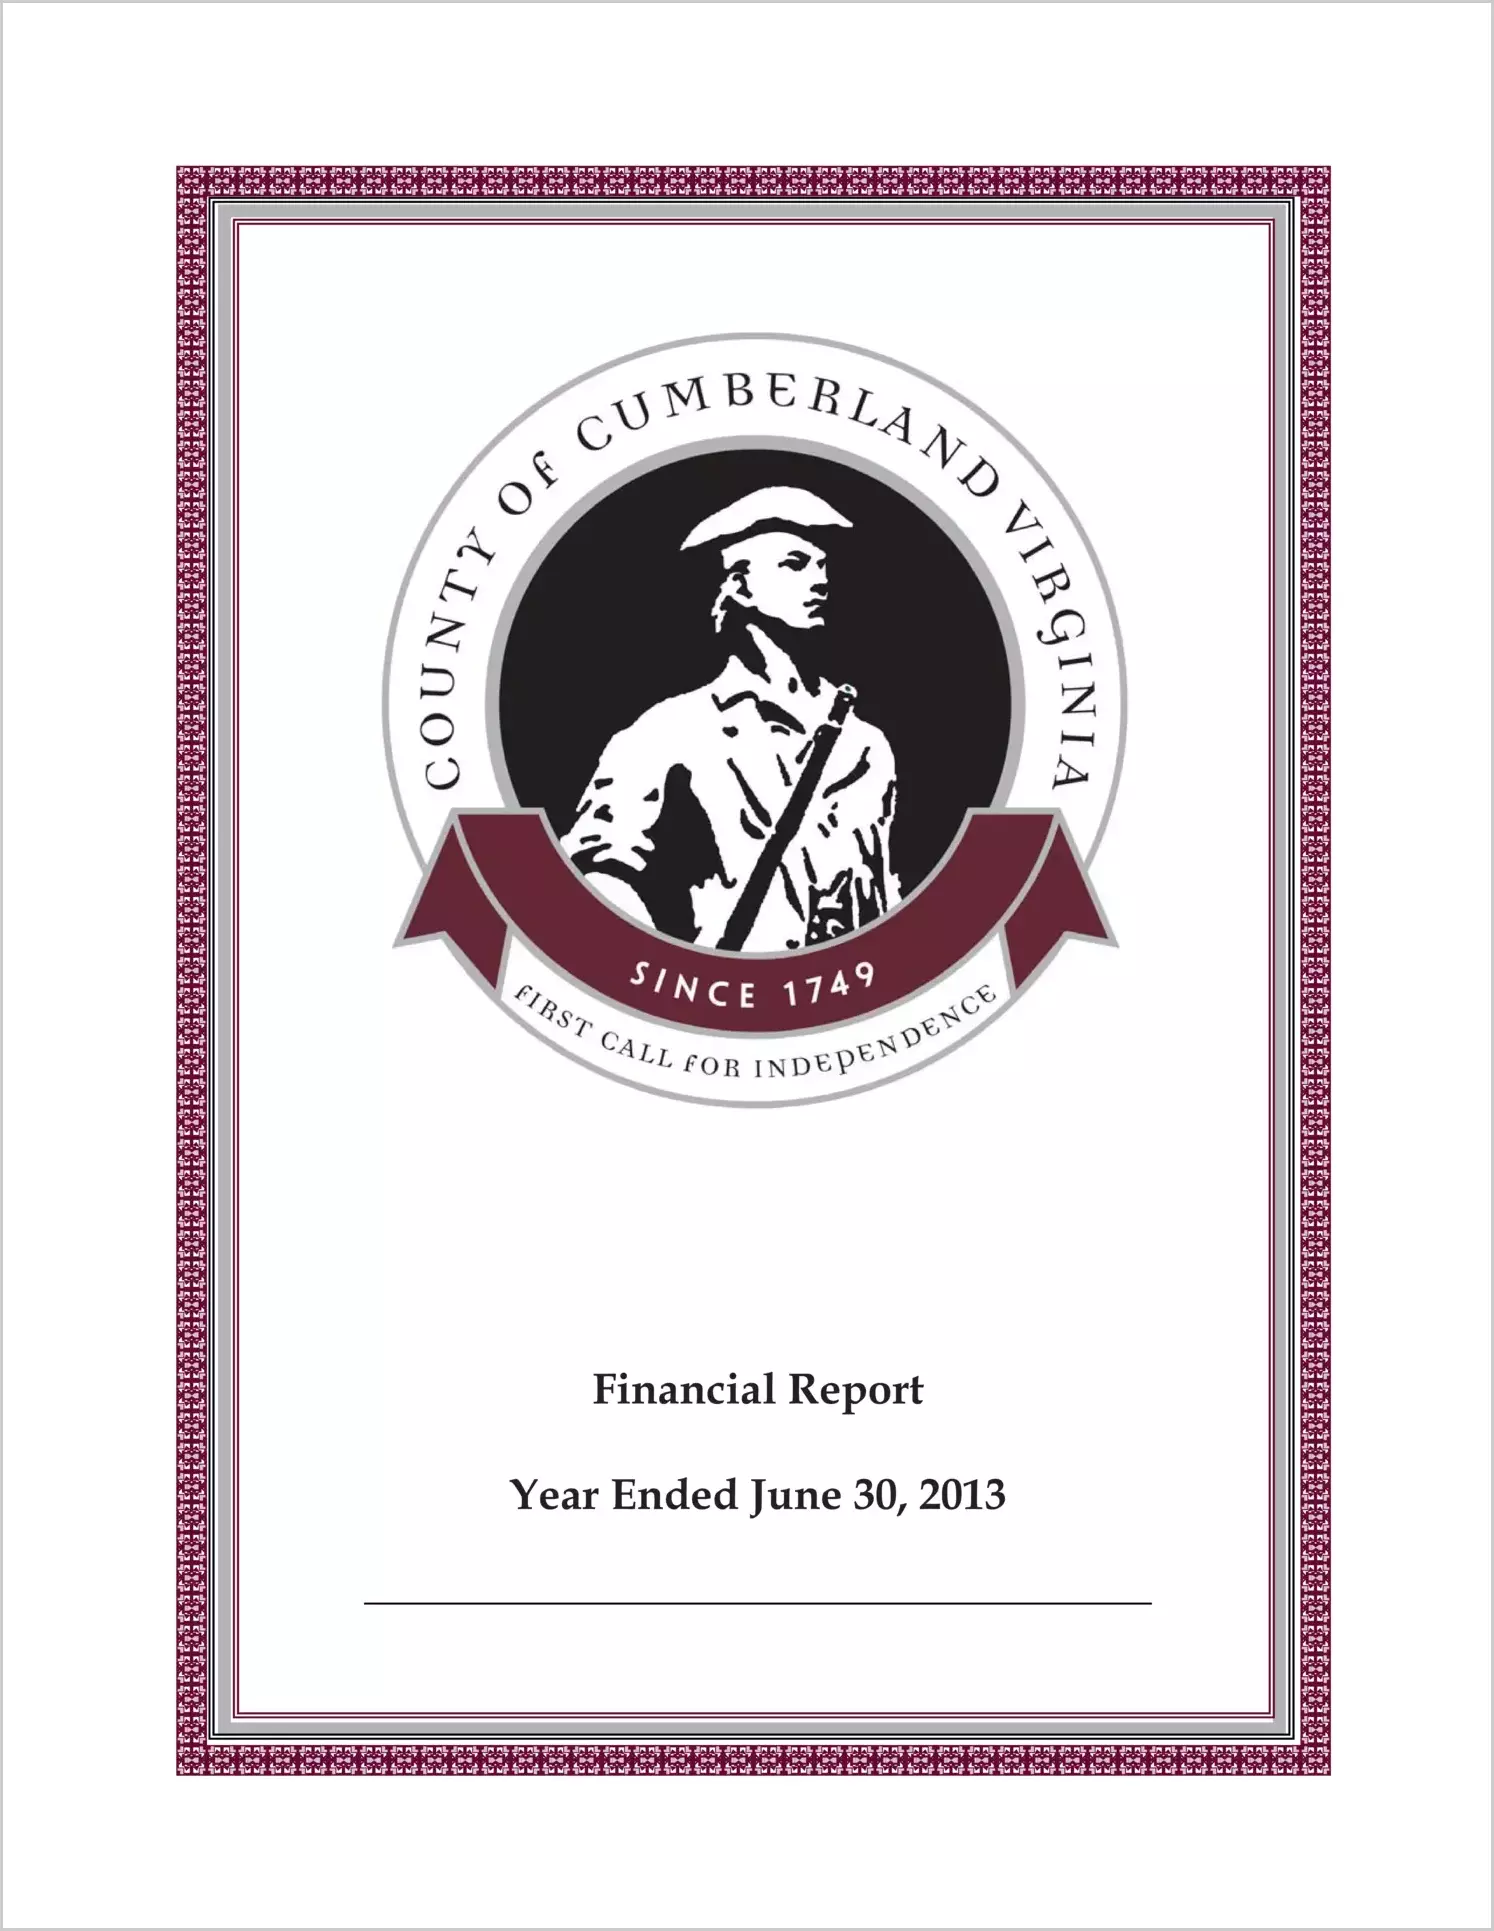 2013 Annual Financial Report for County of Cumberland